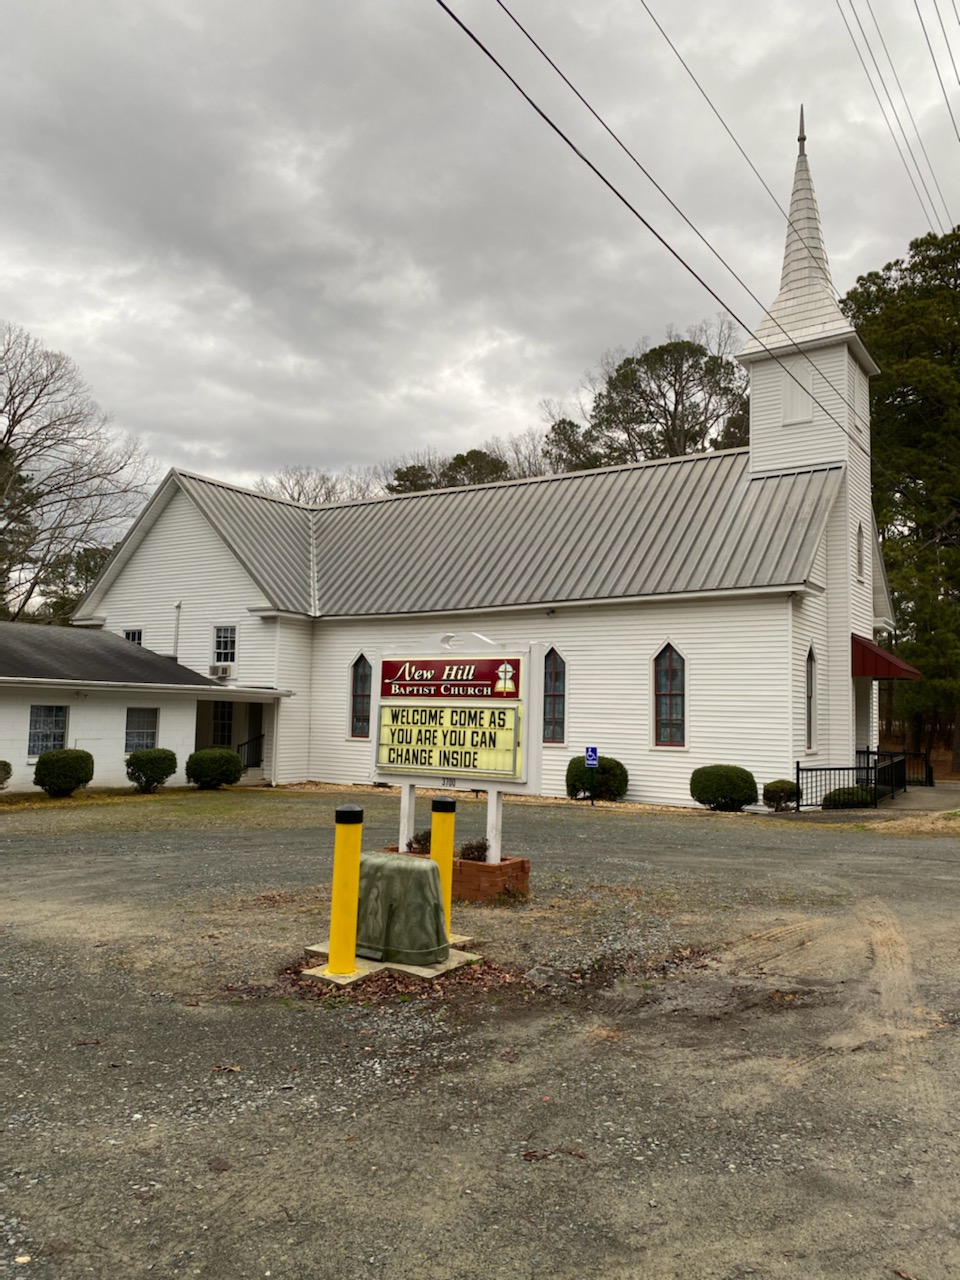 New Hill Baptist Church | 3700 Old US 1 Hwy, New Hill, NC 27562 | Phone: (919) 362-0250